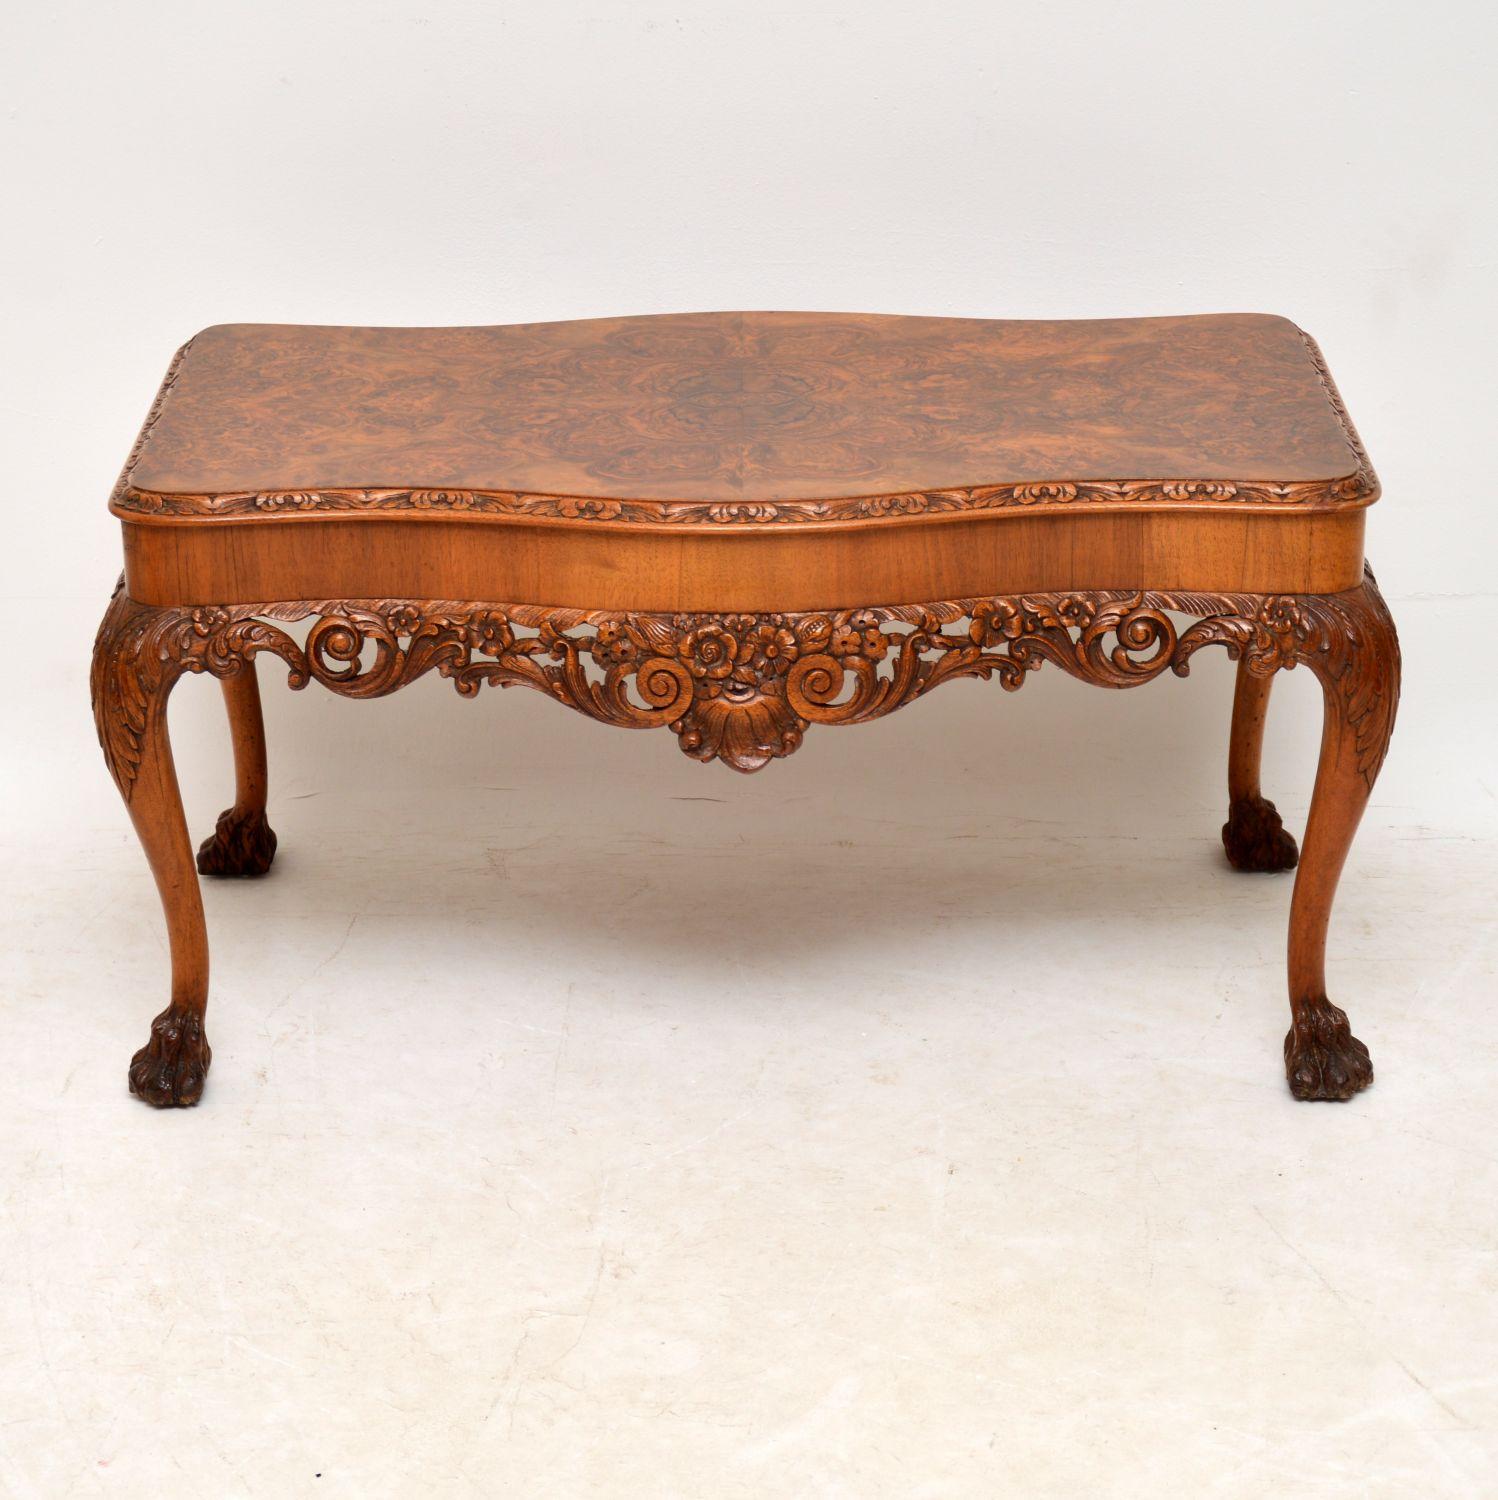 This antique walnut Queen Anne style coffee table has some fabulous carvings all-over and even has carved hairy paw feet. The top is a beautifully patterned burr walnut. This table is in excellent original condition and dates to circa 1920s-1930s